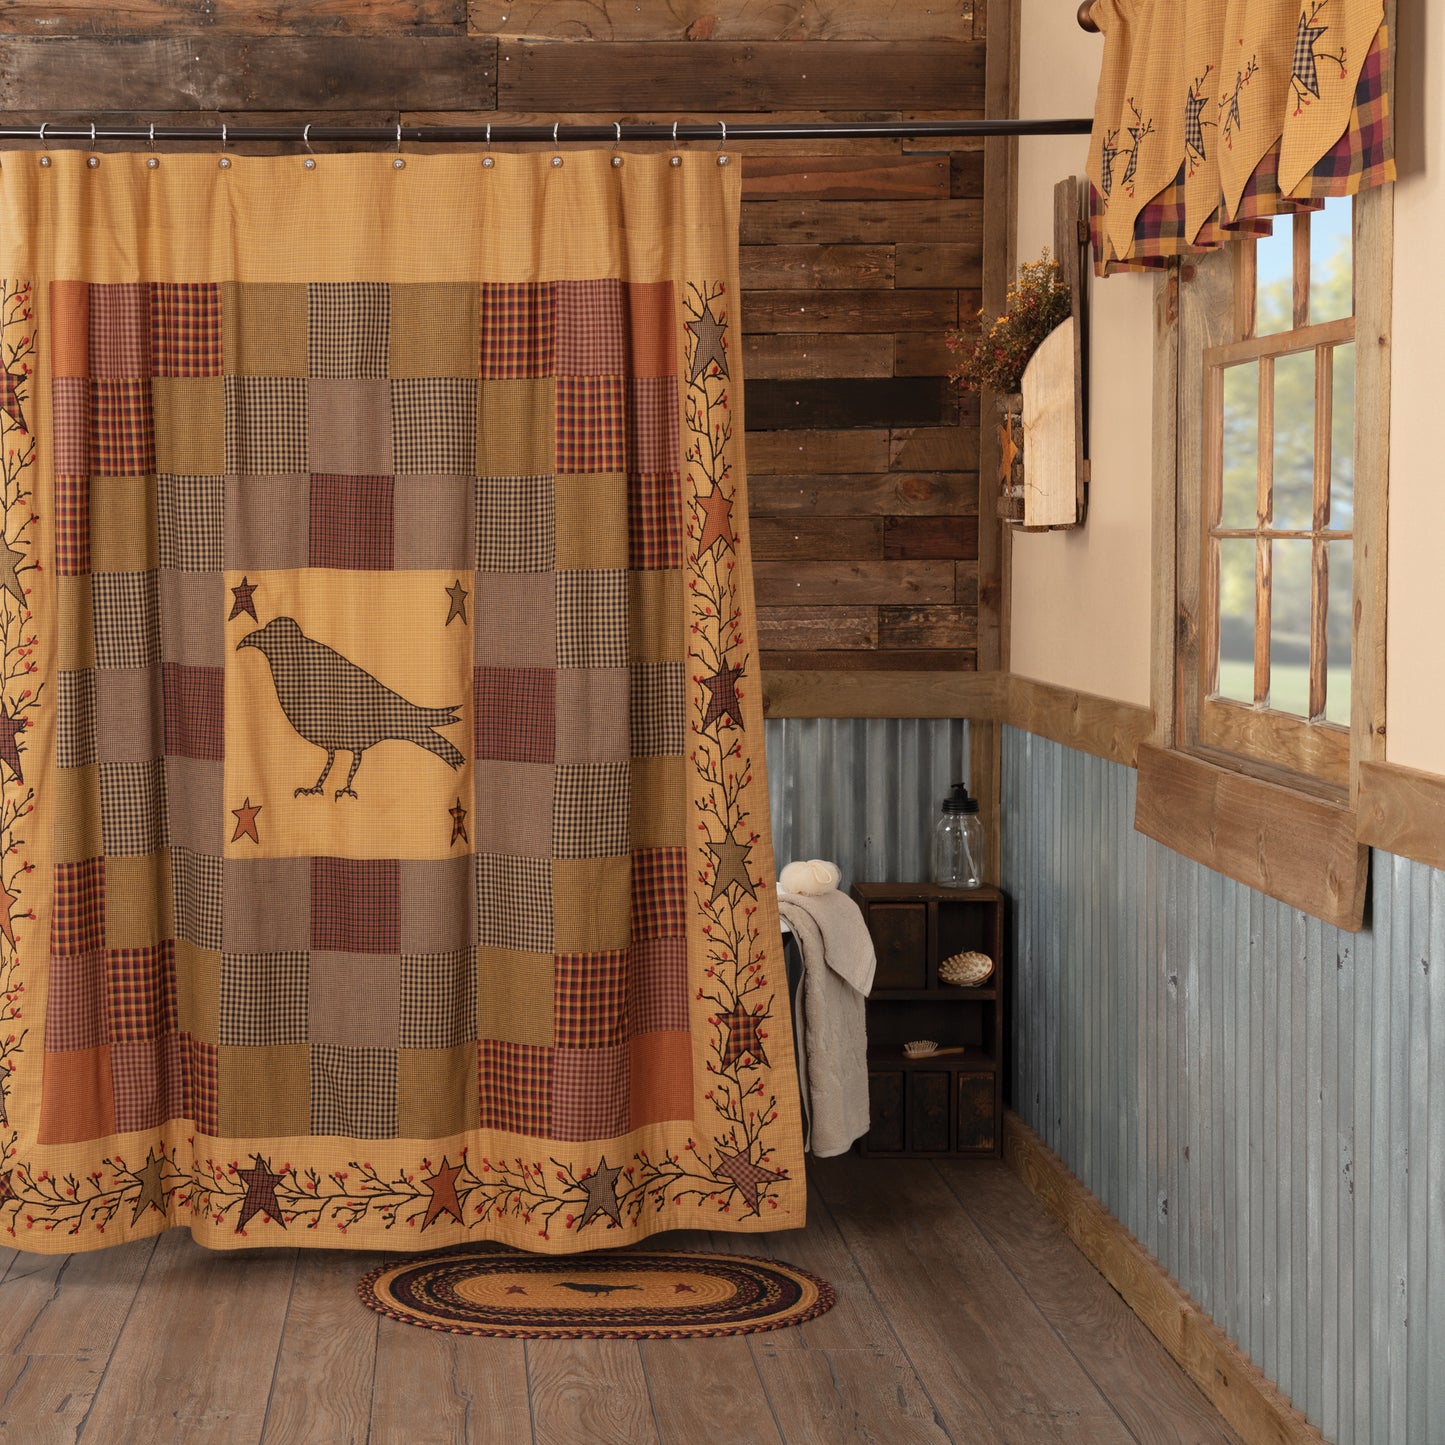 Heritage Farms Applique Crow and Star Shower Curtain 72x72